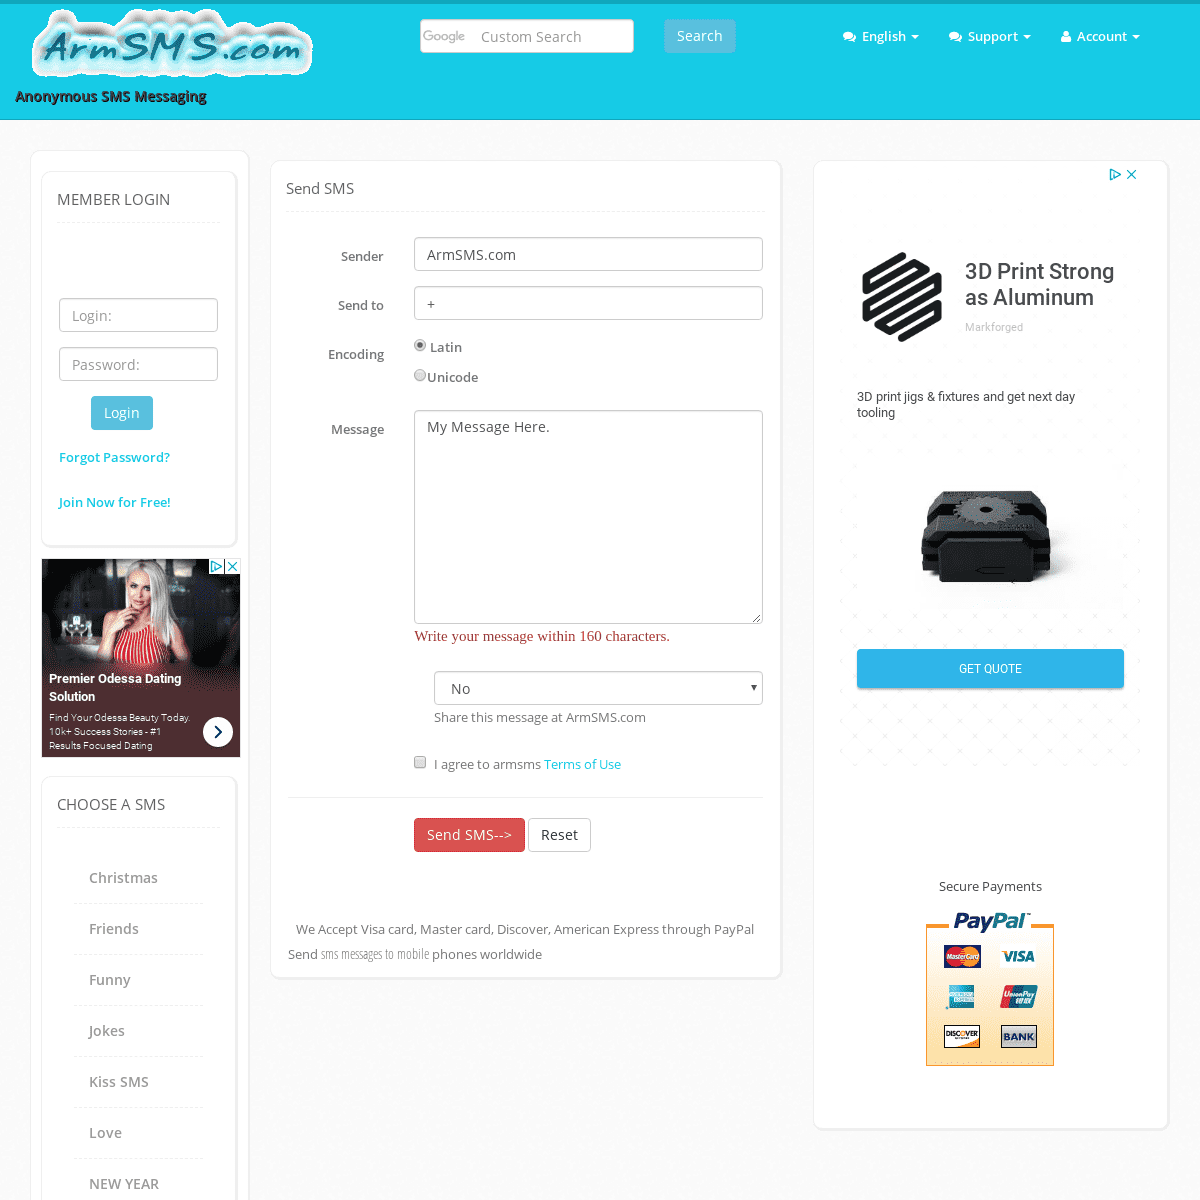 A complete backup of armsms.com